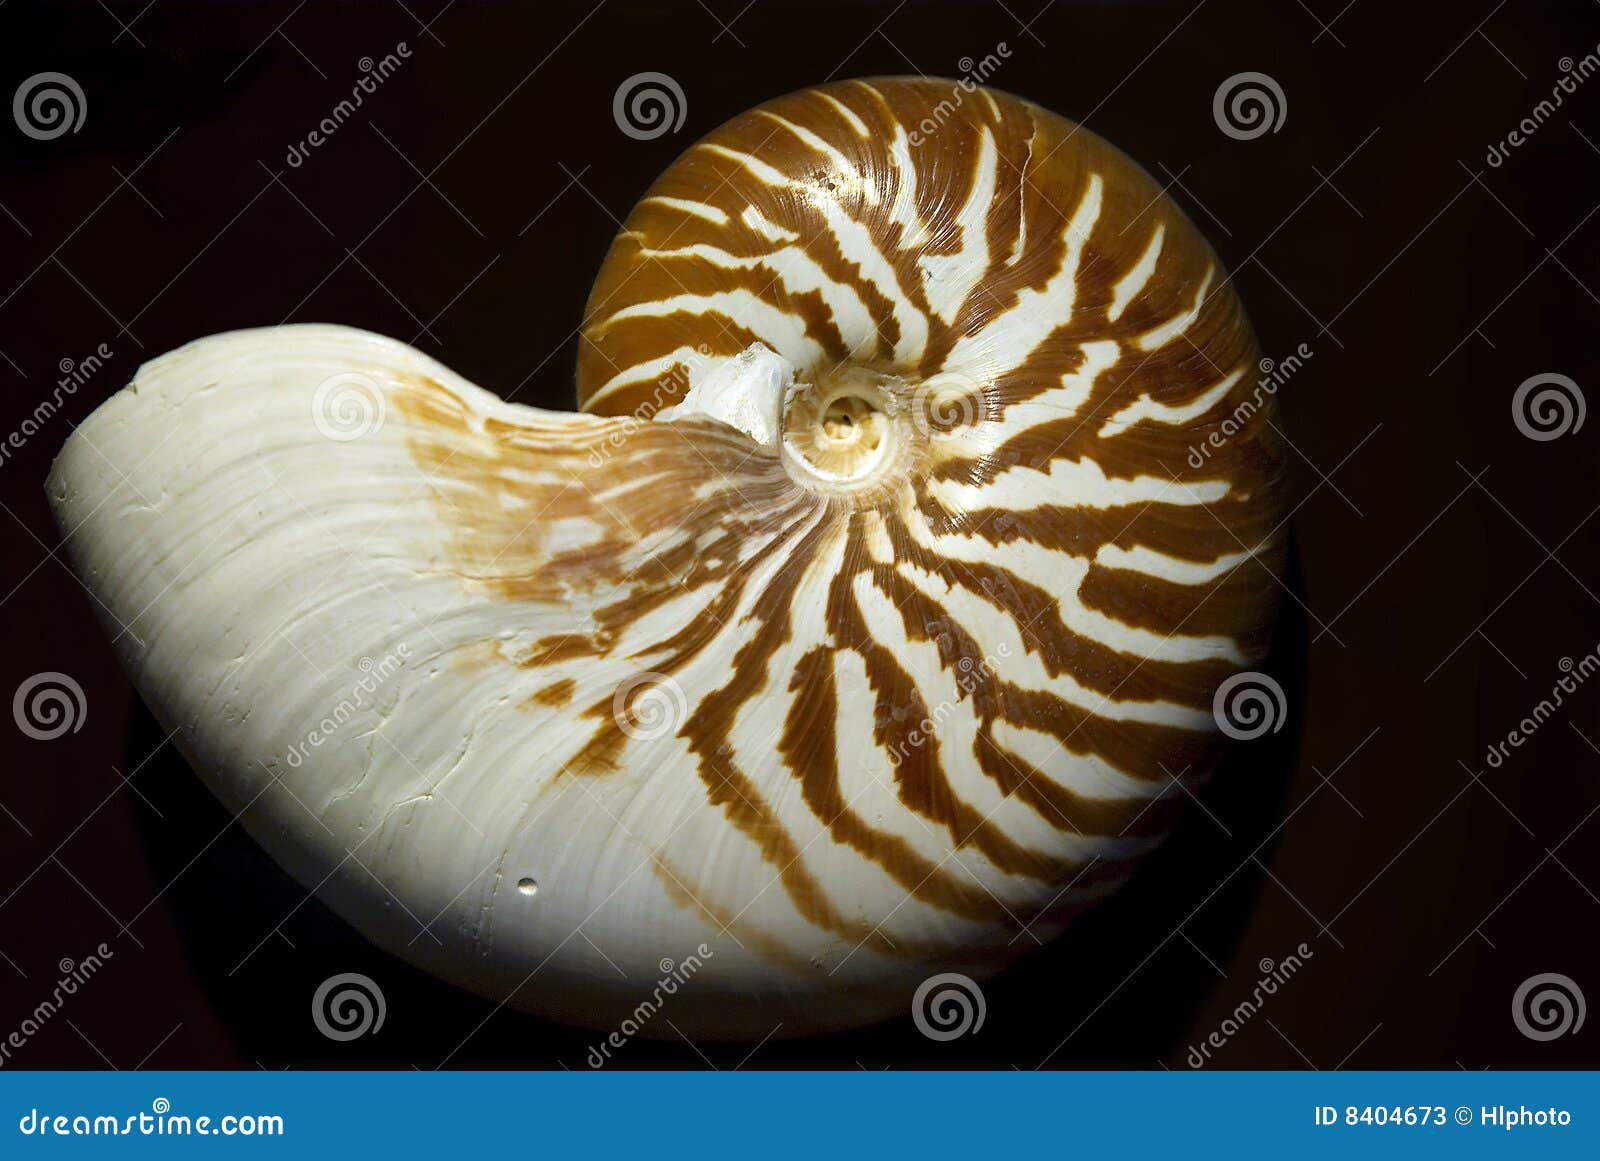 An old large Nautilus shell on black background.